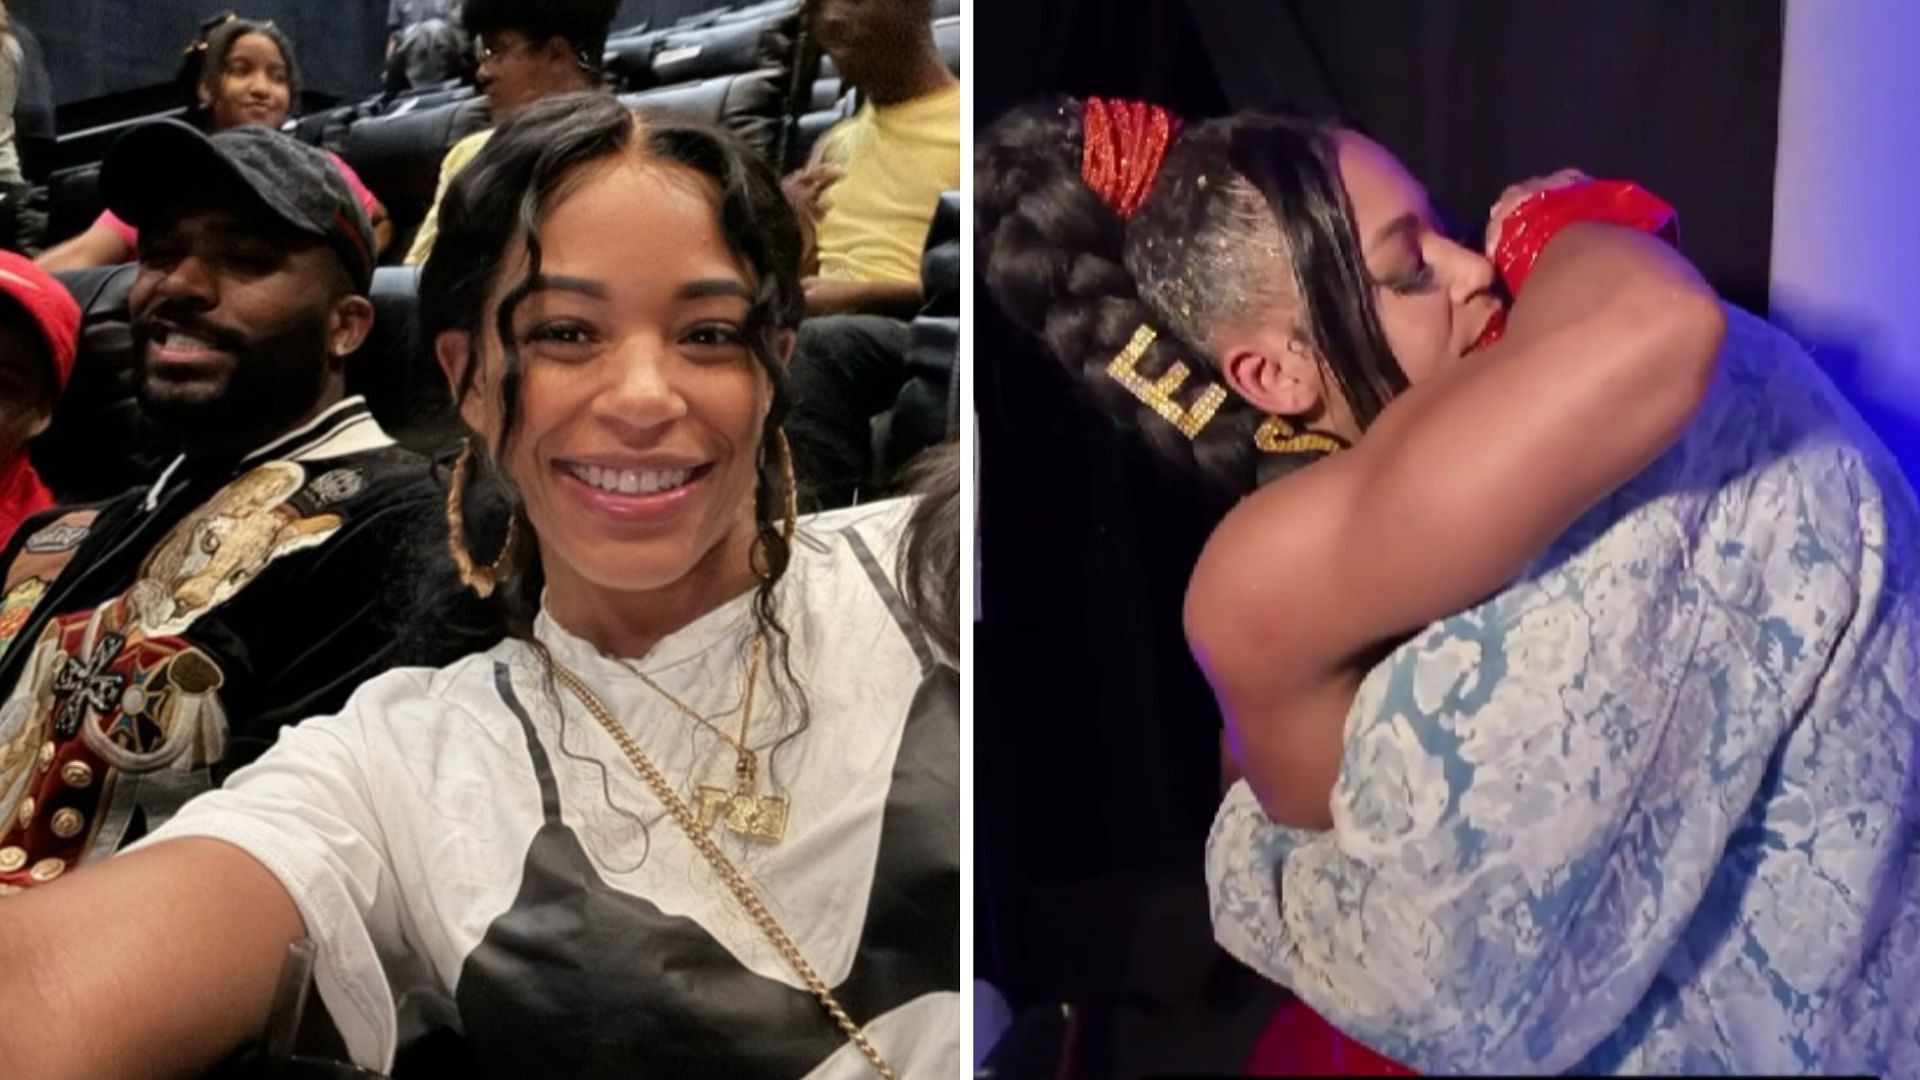 Bianca Belair and Montez Ford are married [Image credits: stars